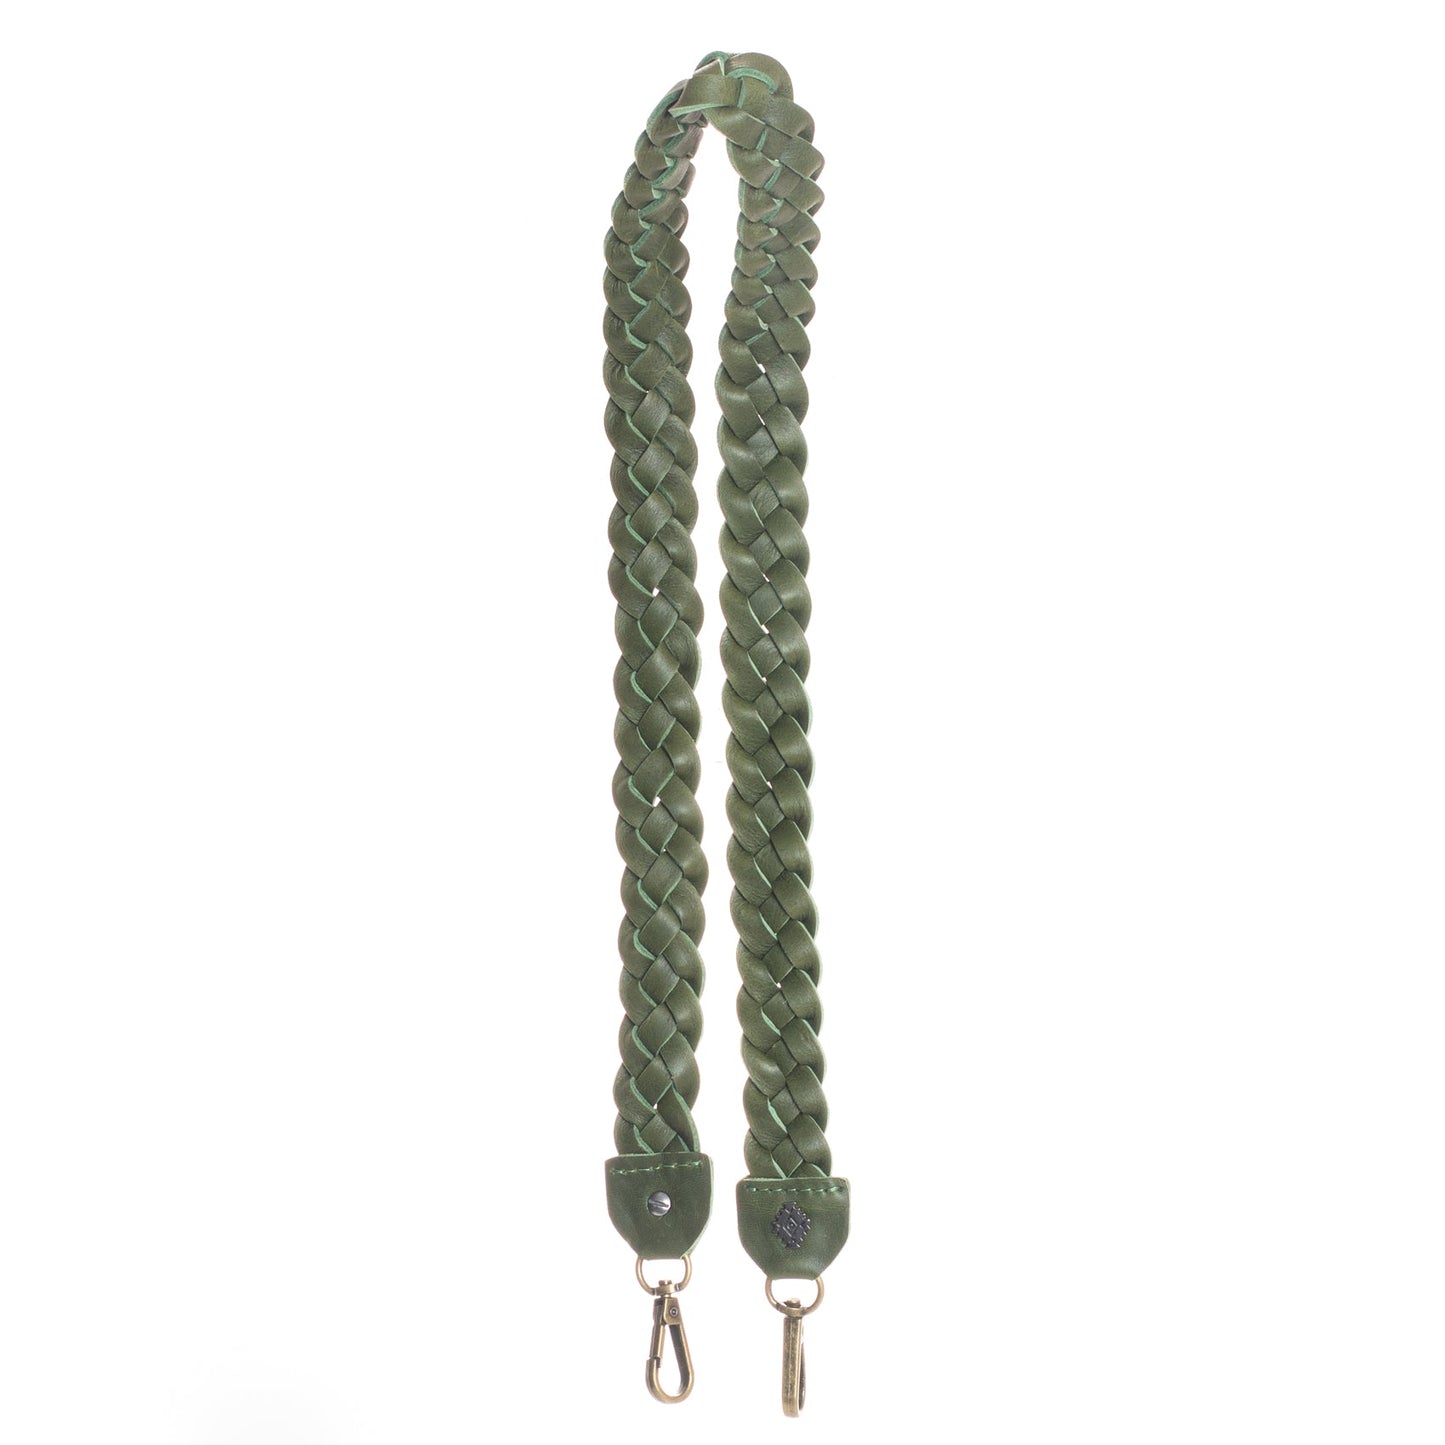 BRAIDED CROSS BODY STRAP - ARTISAN COLLECTION - FULL LEATHER - DEEP EMERALD